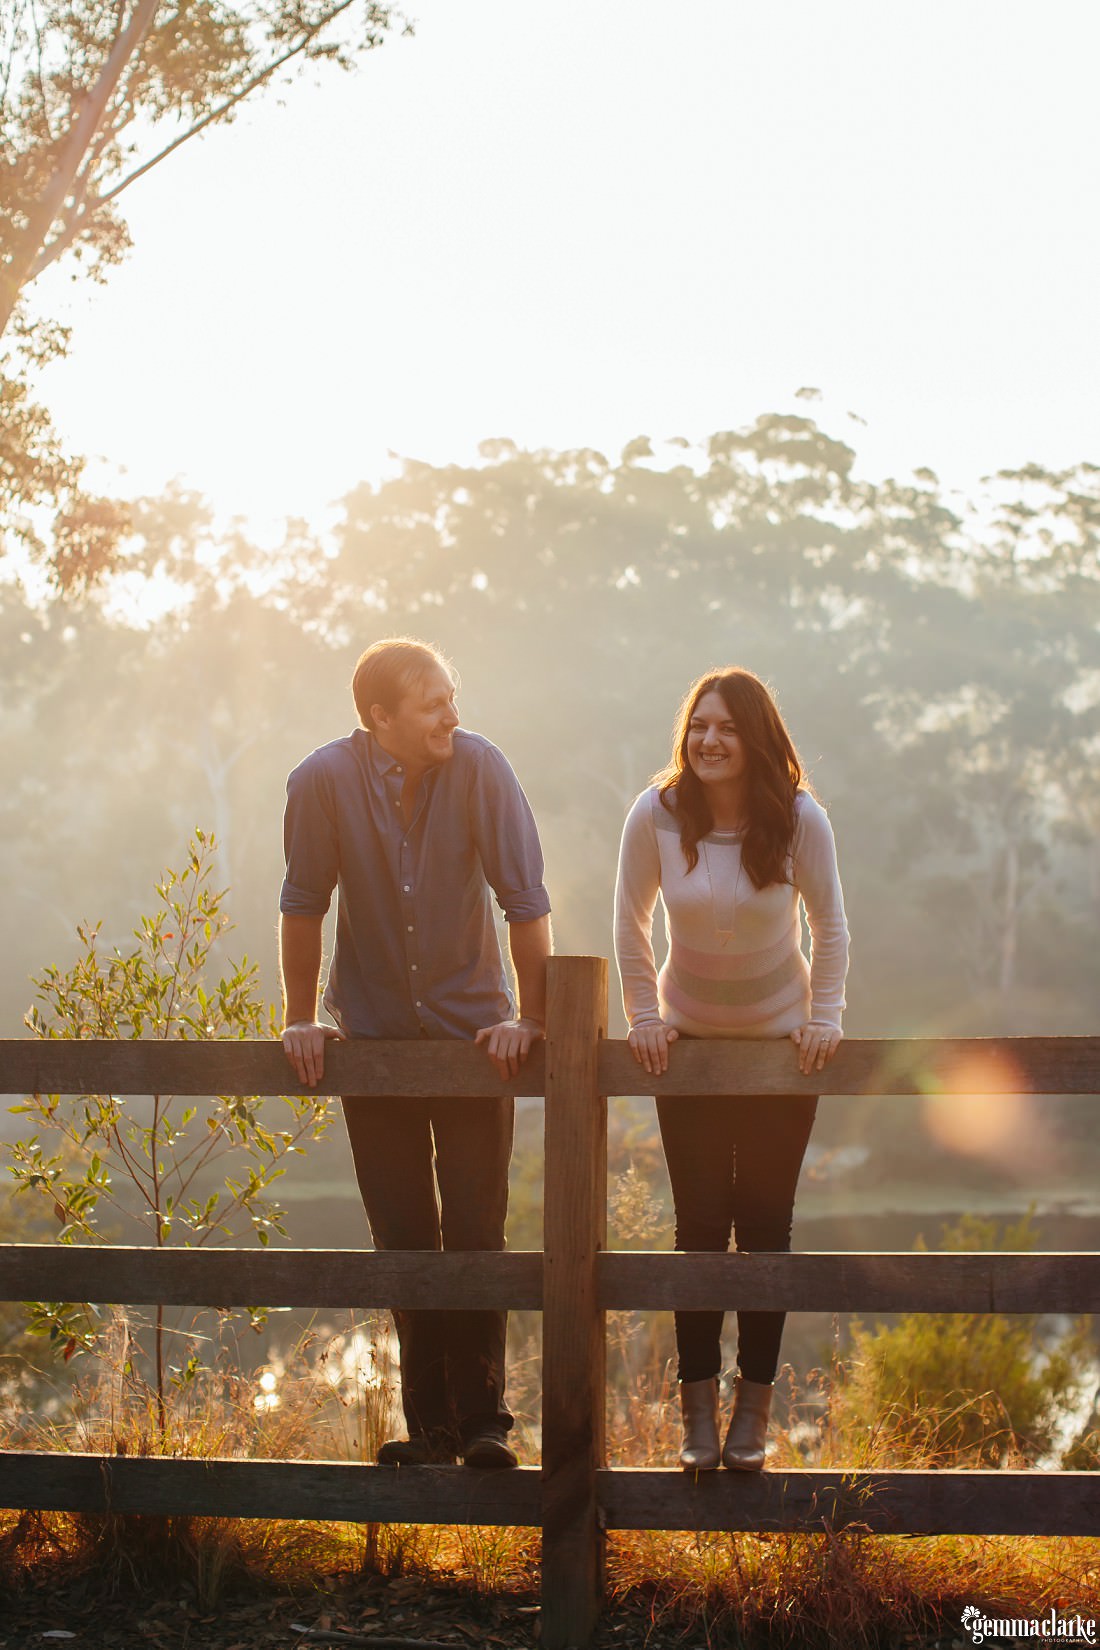 Couple standing on a wooden fence and hanging over while the sun streams over them at Lake Parramatta